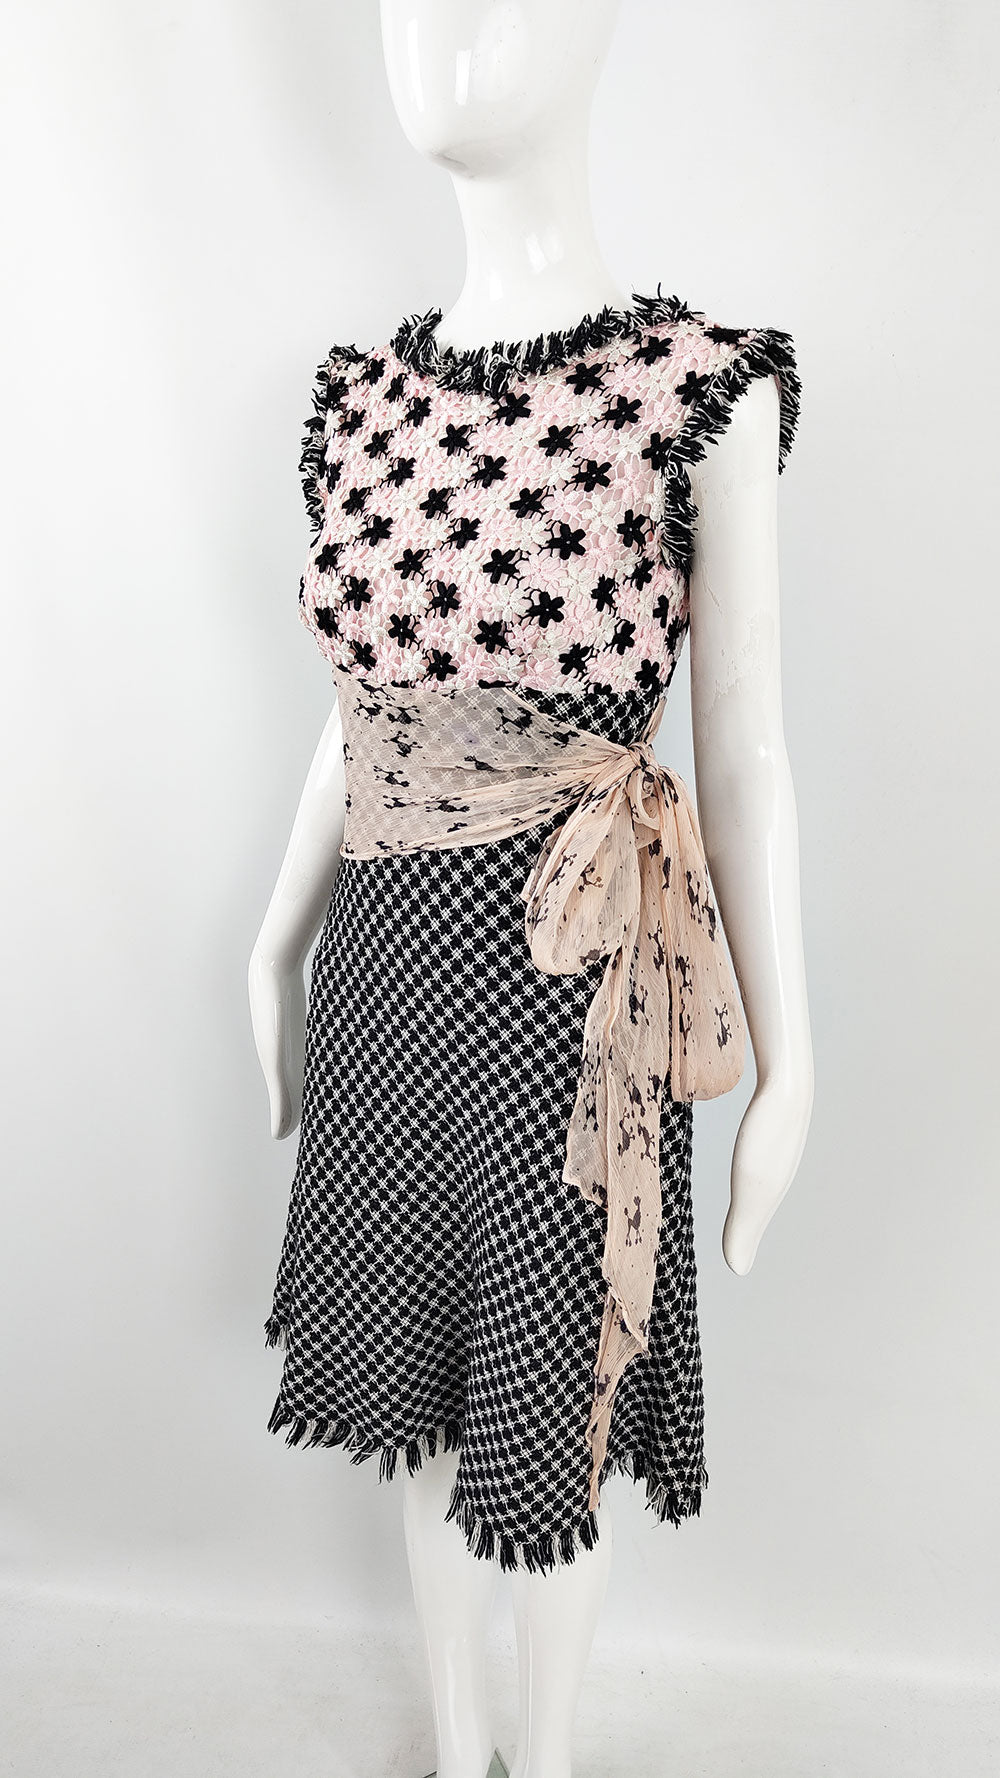 A preppy vintage womens dress from the early 2000s by Ronit Zilkha in a pink, white and black tweed.